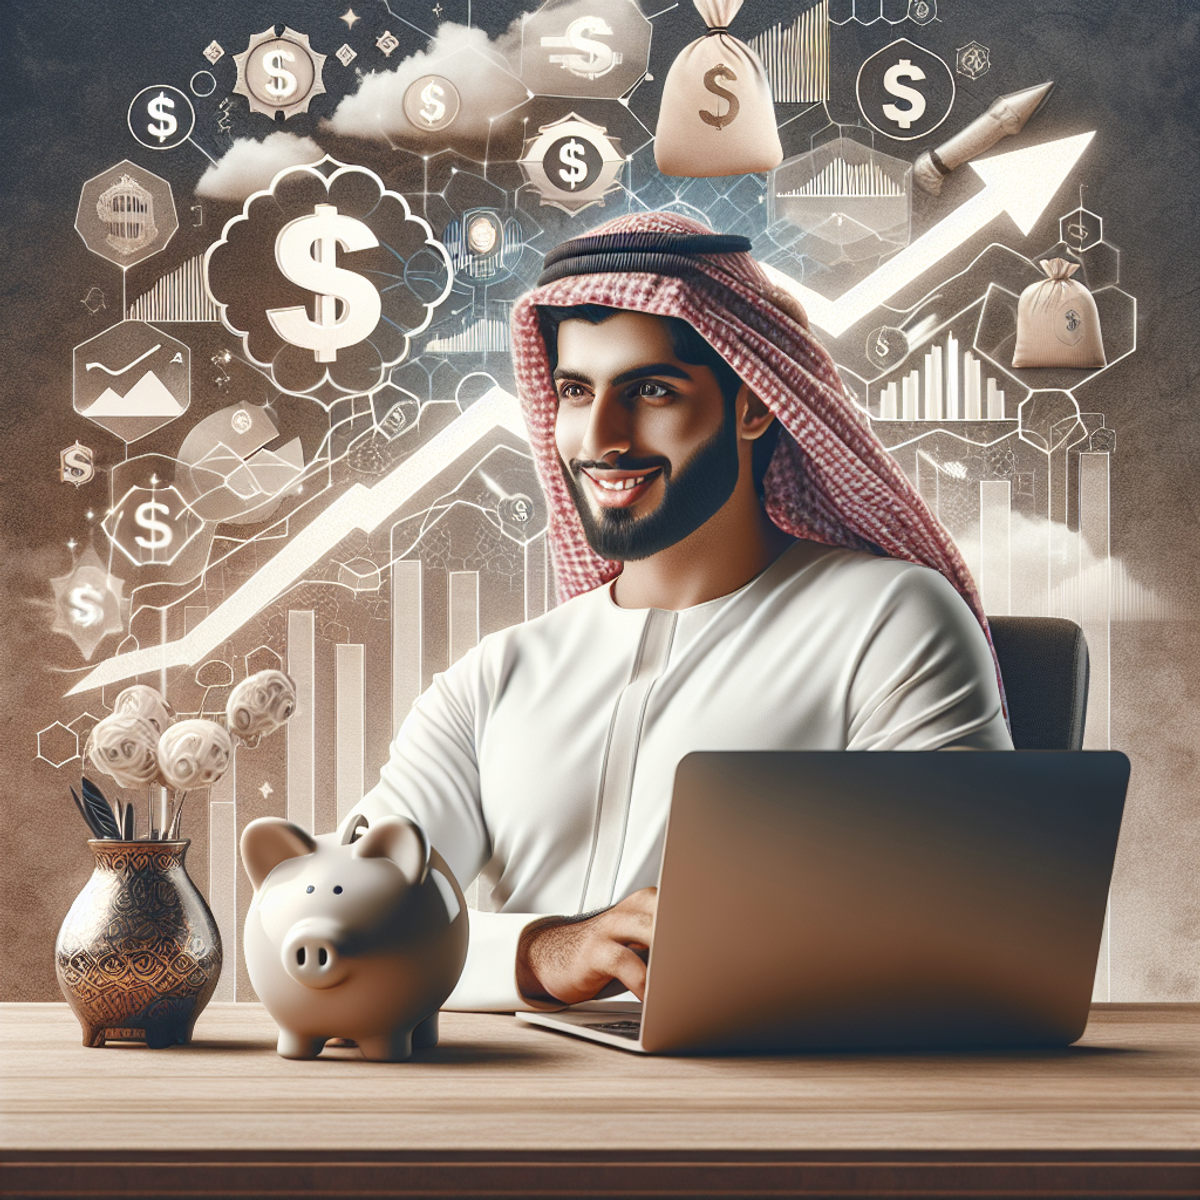 A Middle-Eastern man sitting comfortably with a laptop, surrounded by symbols of wealth and financial success.